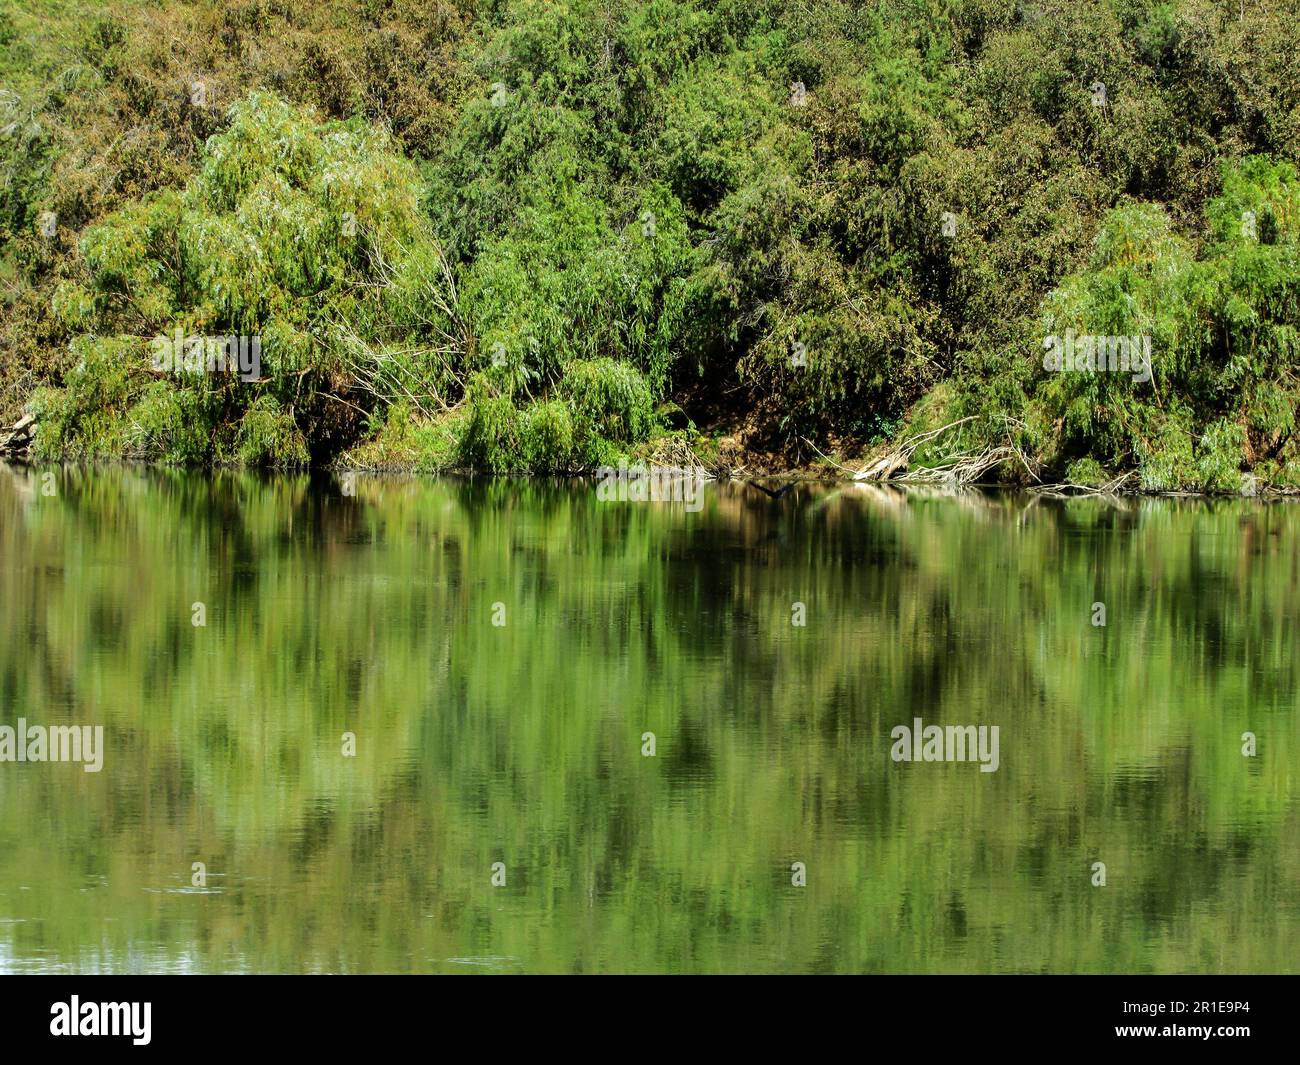 Lush growth, on the Riverbank of the Orange River in South Africa, reflecting in the water Stock Photo